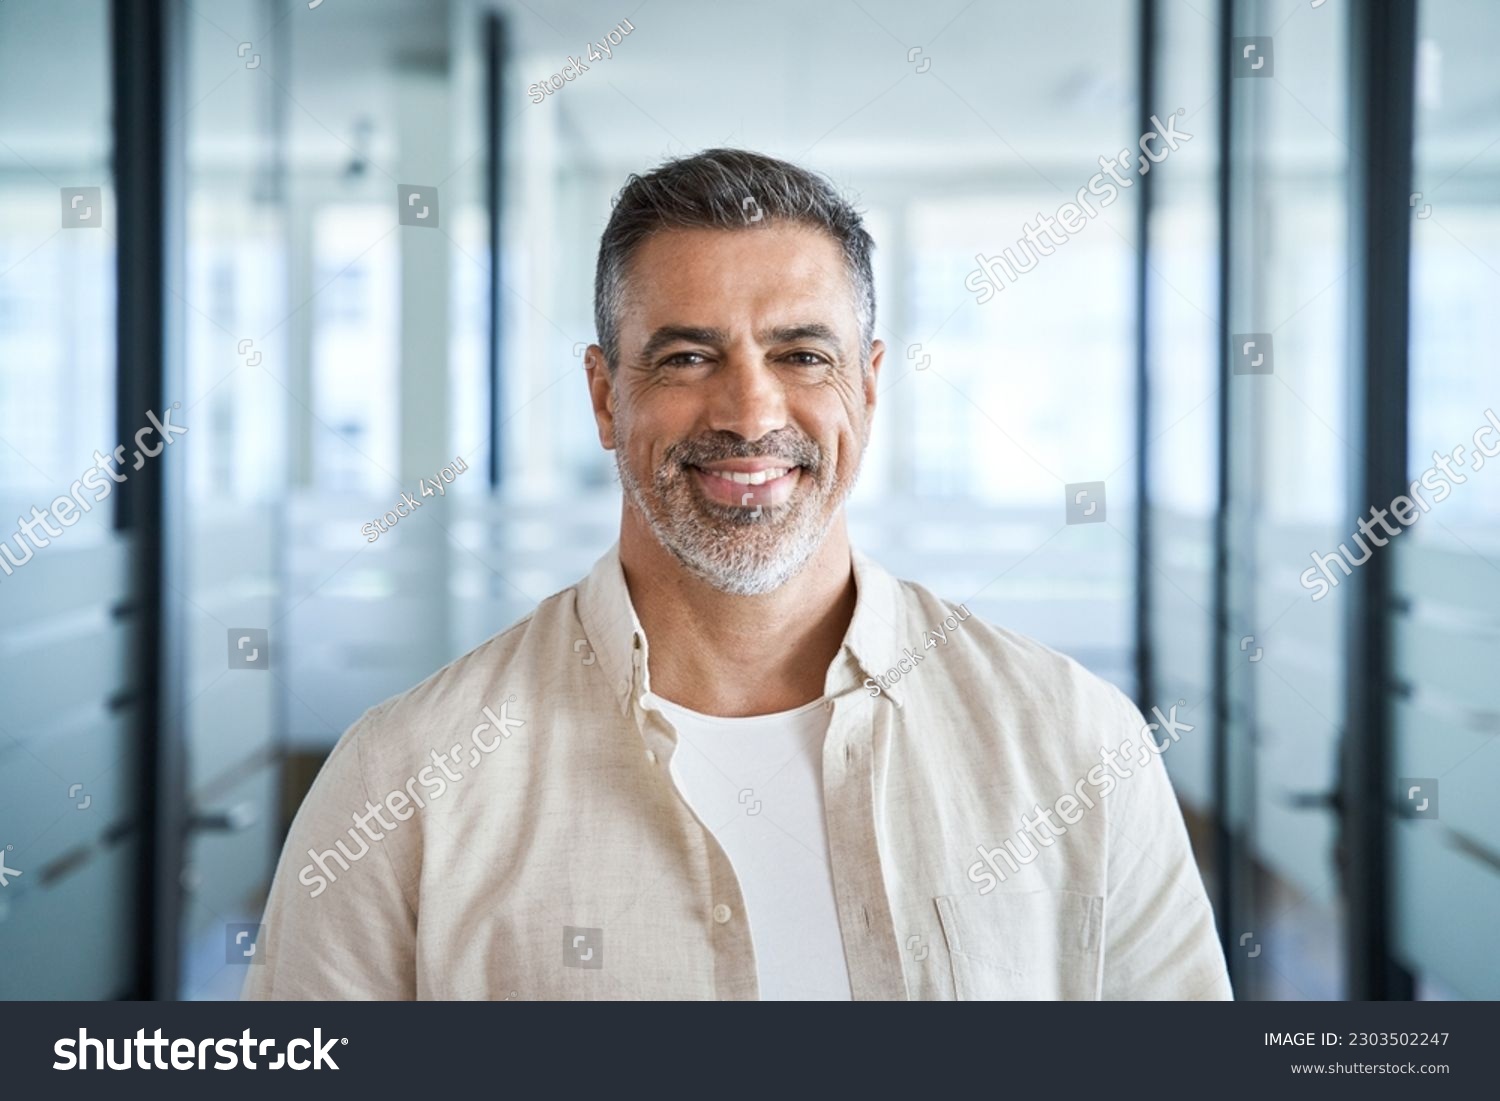 Headshot close up portrait of indian or latin confident mature good looking middle age leader, ceo male businessman on blur office background. Handsome hispanic senior business man smiling at camera. #2303502247